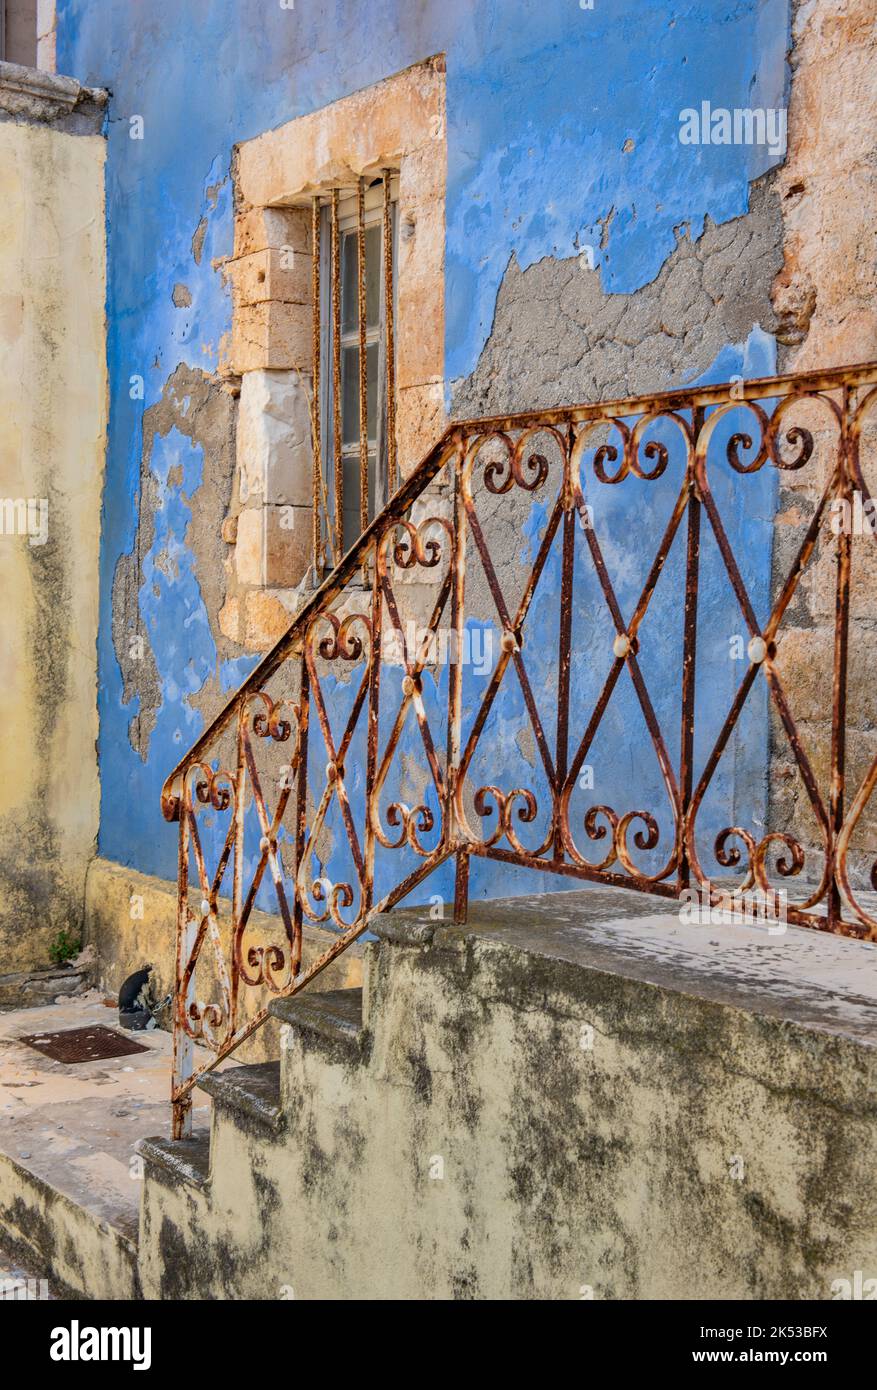 beautiful old weather-beaten shabby chic style greek building with faded blue painted walls and rusty railings, dereliction and weathered buildings. Stock Photo